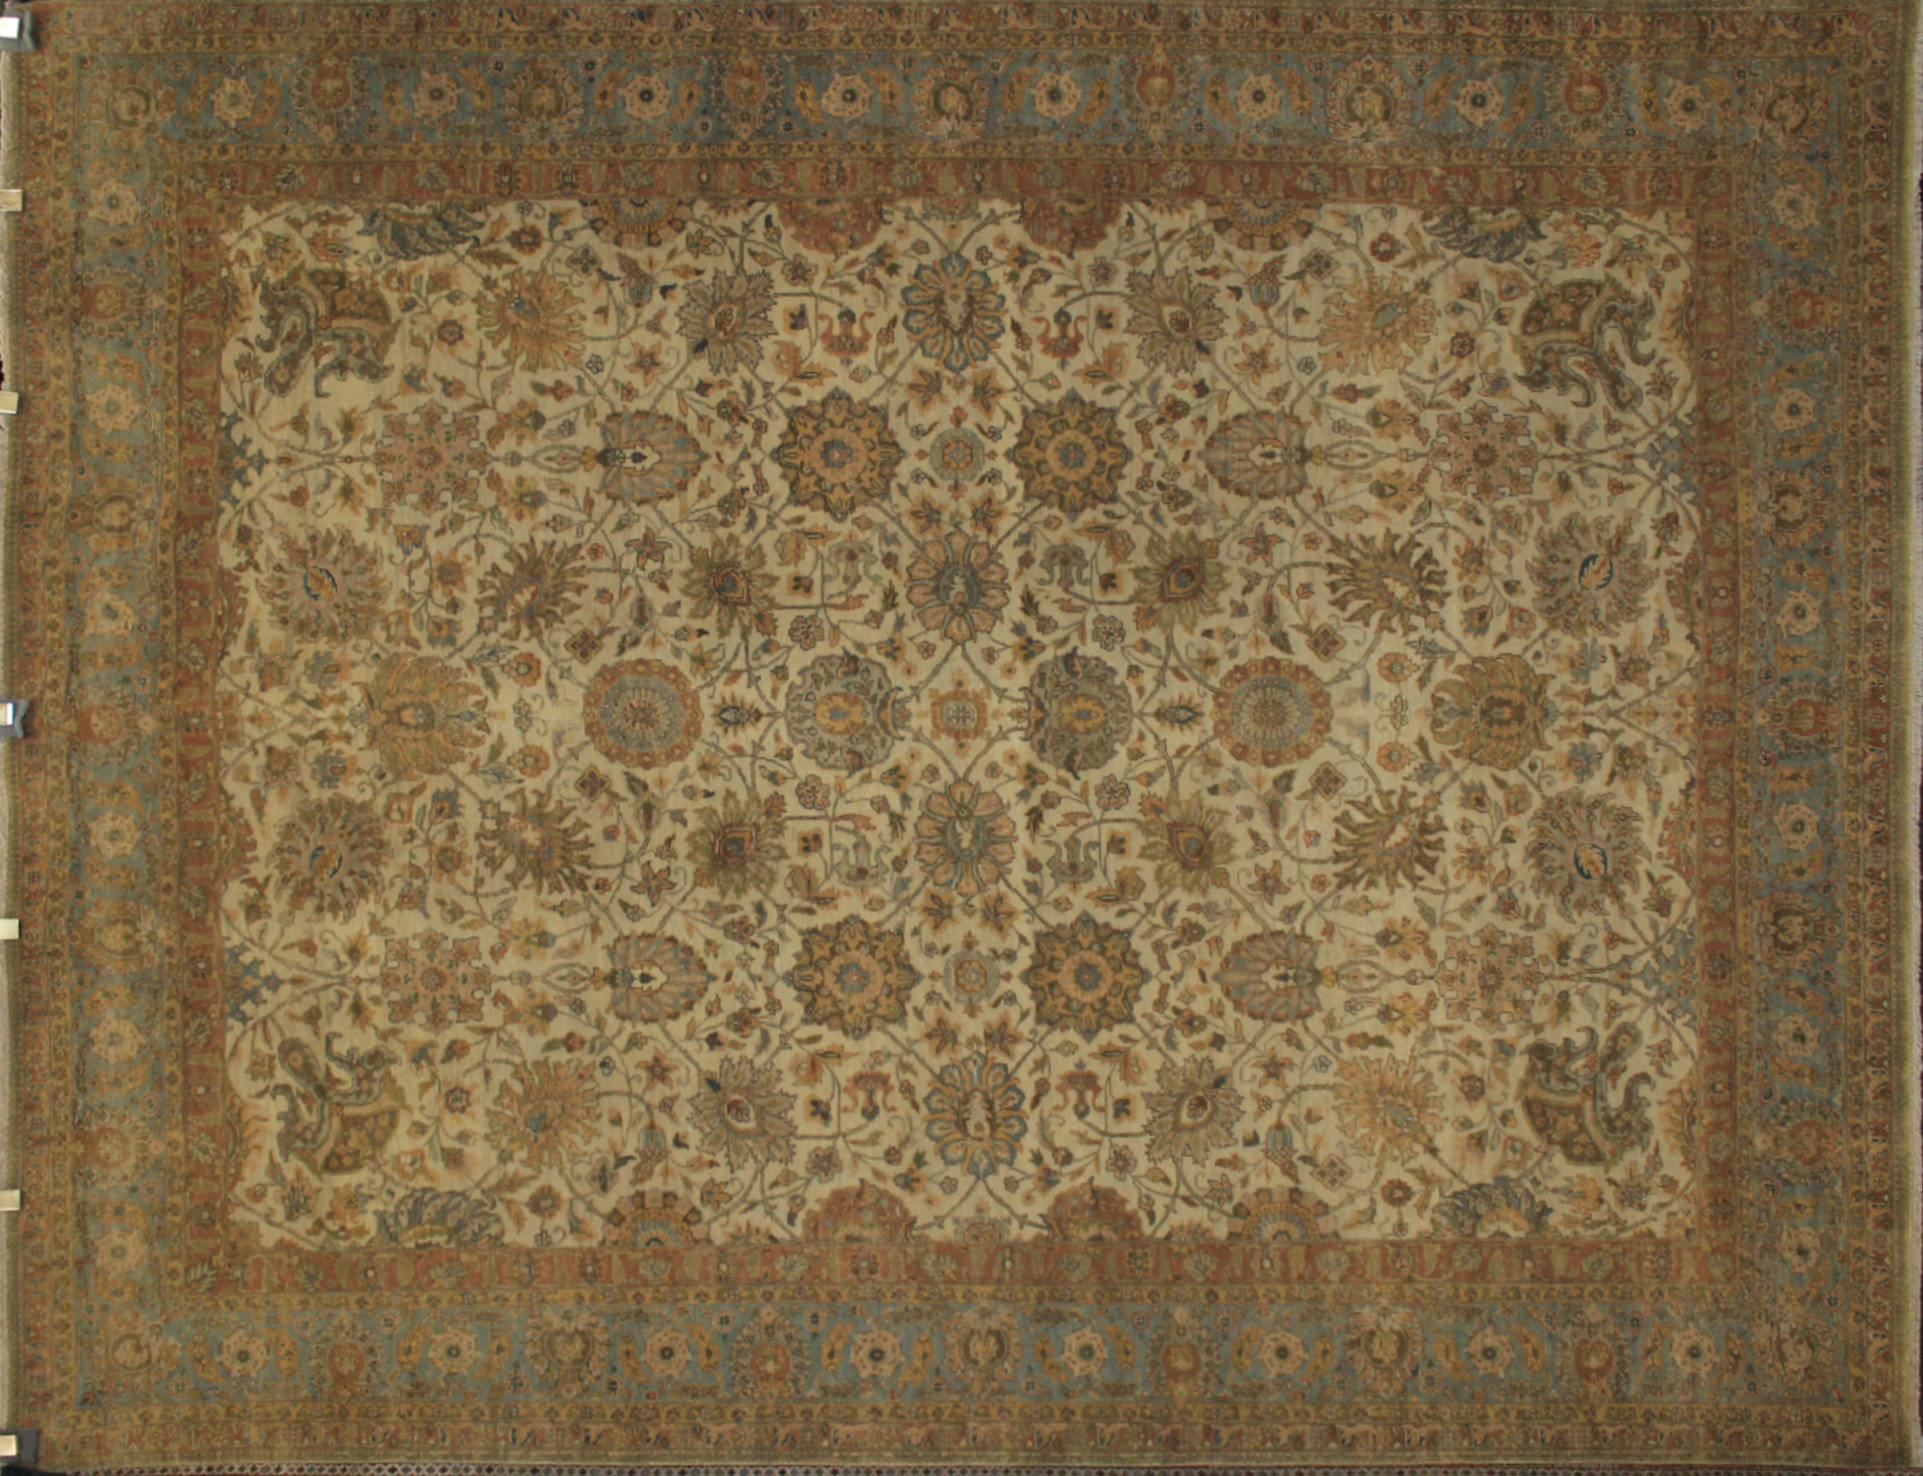 8x10 Antique Revival Hand Knotted Wool Area Rug - MR11665